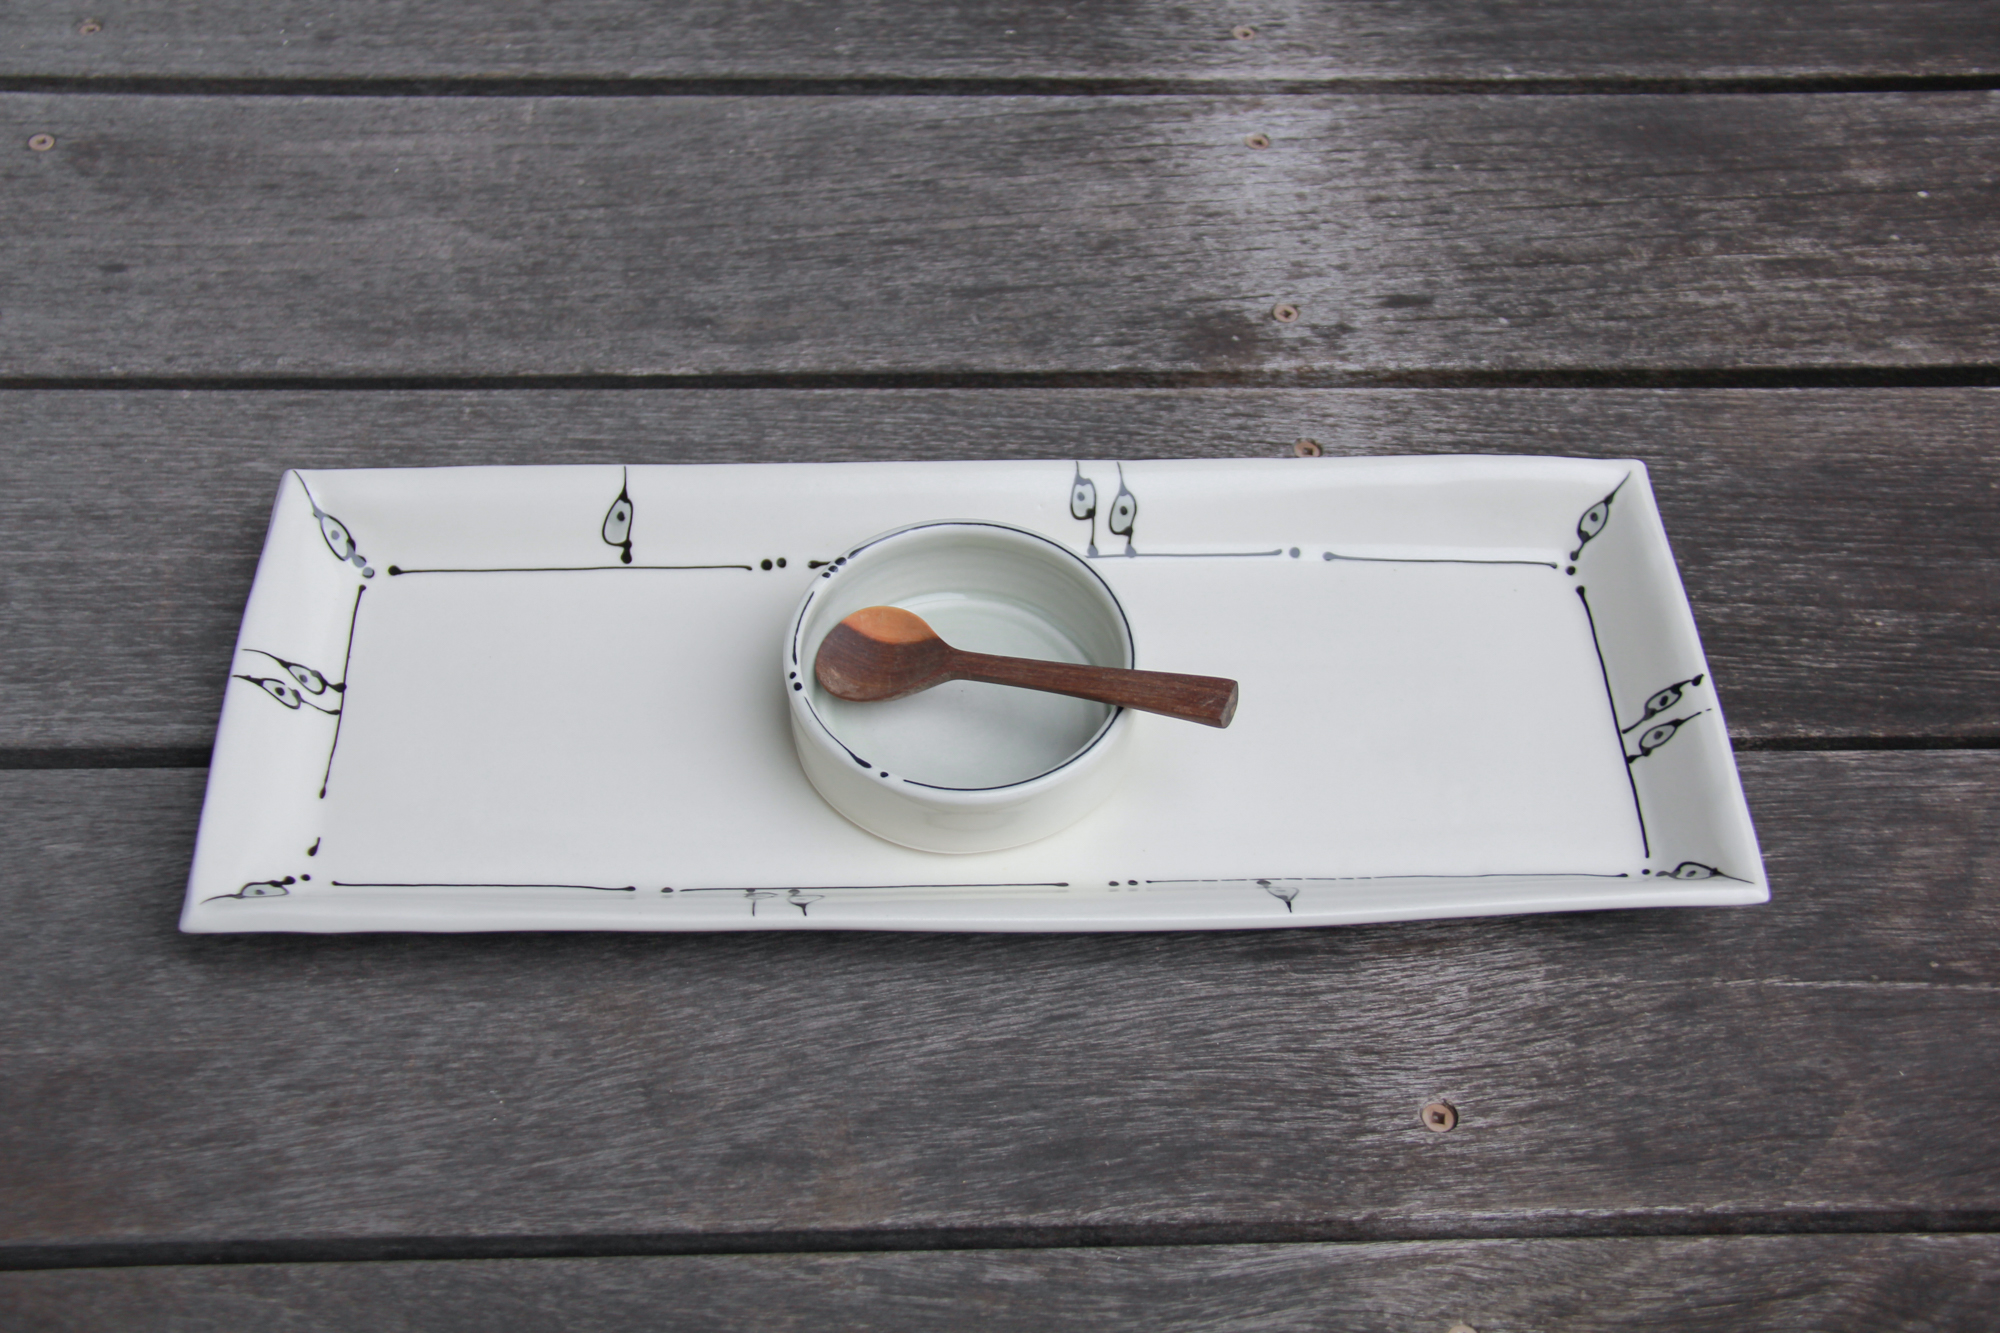 Iris Dorton: Medium Tray with Circle Dot Line Motif, comes with Wood Spoon and Dish Product Image 11 of 11